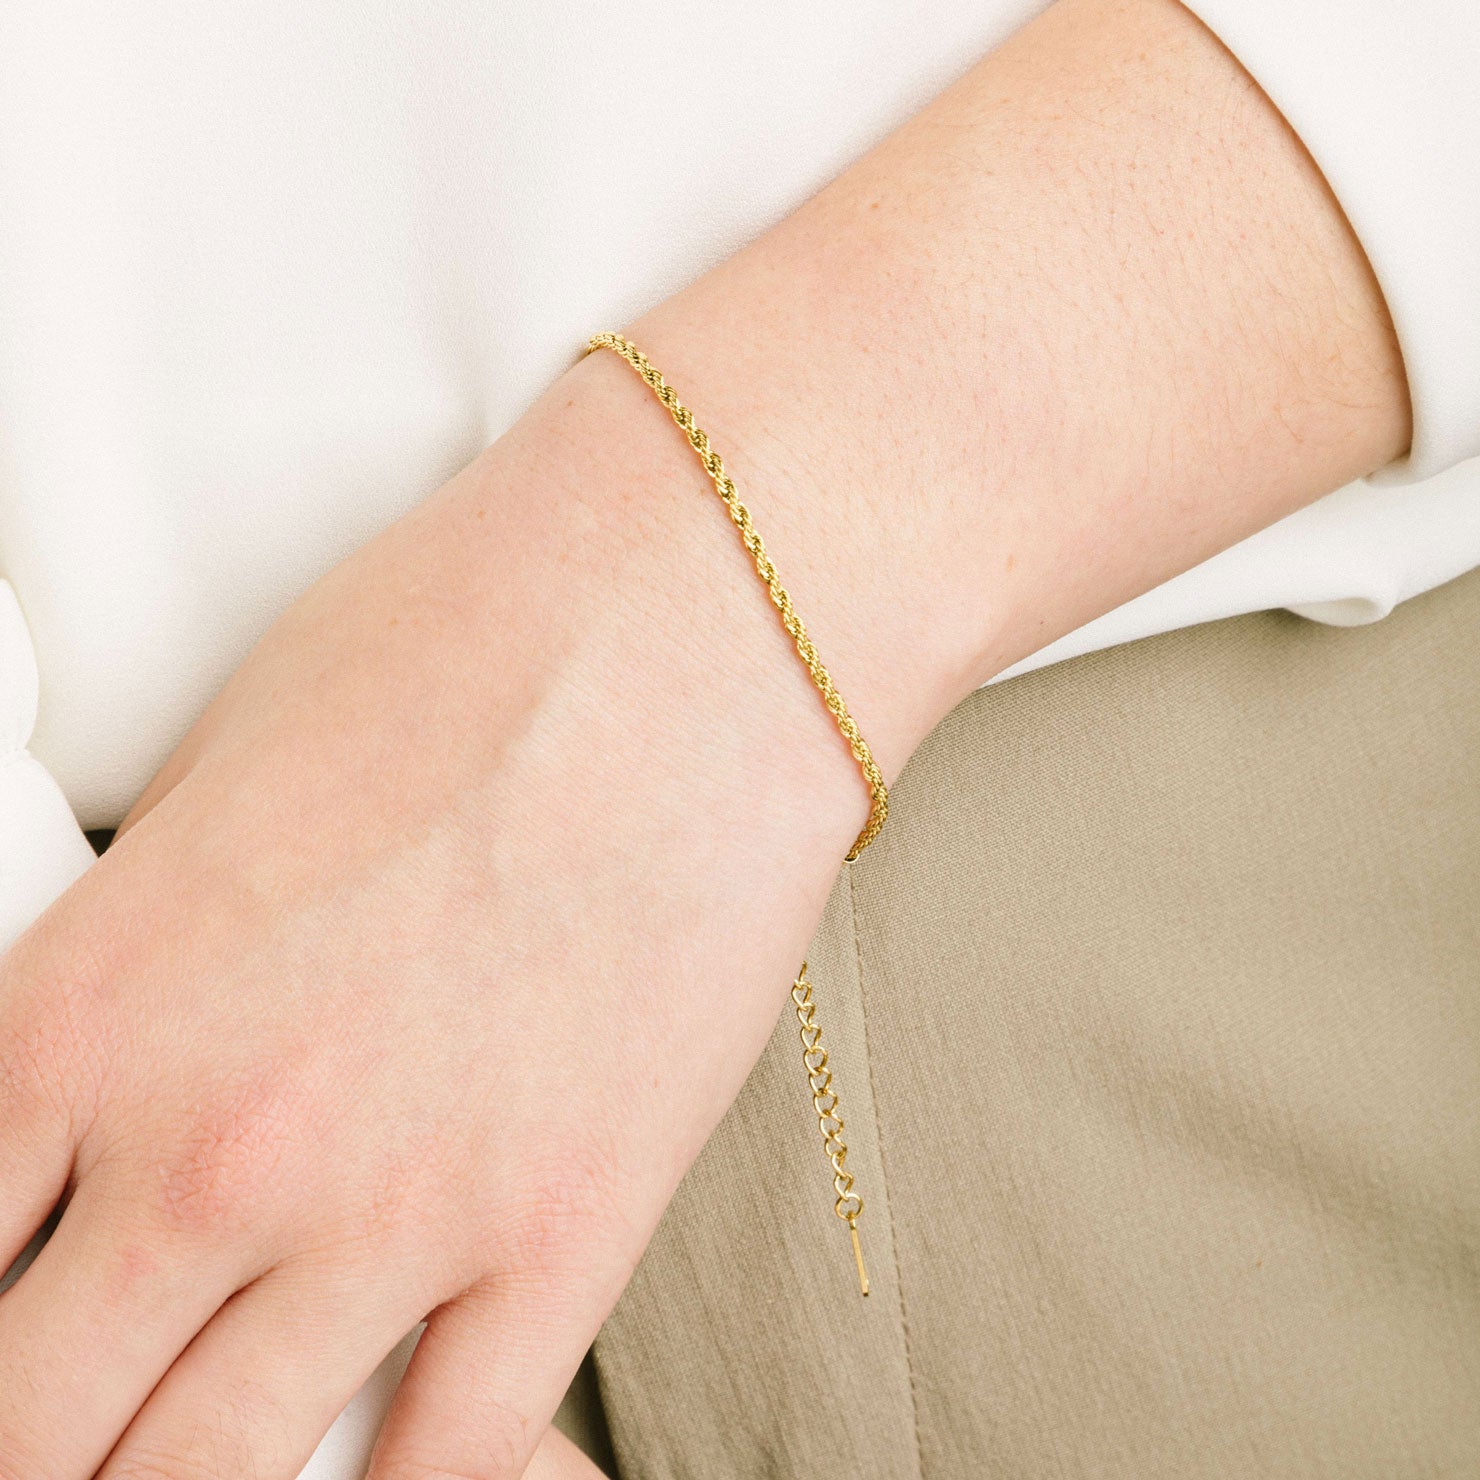 A model wearing the Twisted Chain Bracelet is crafted from 14K Gold Plated Stainless Steel, making it both non-tarnish and water resistant. It is also free from Nickel, Lead and Cadmium, ensuring a safe and durable design. Additionally, this bracelet is adjustable for a perfect fit.